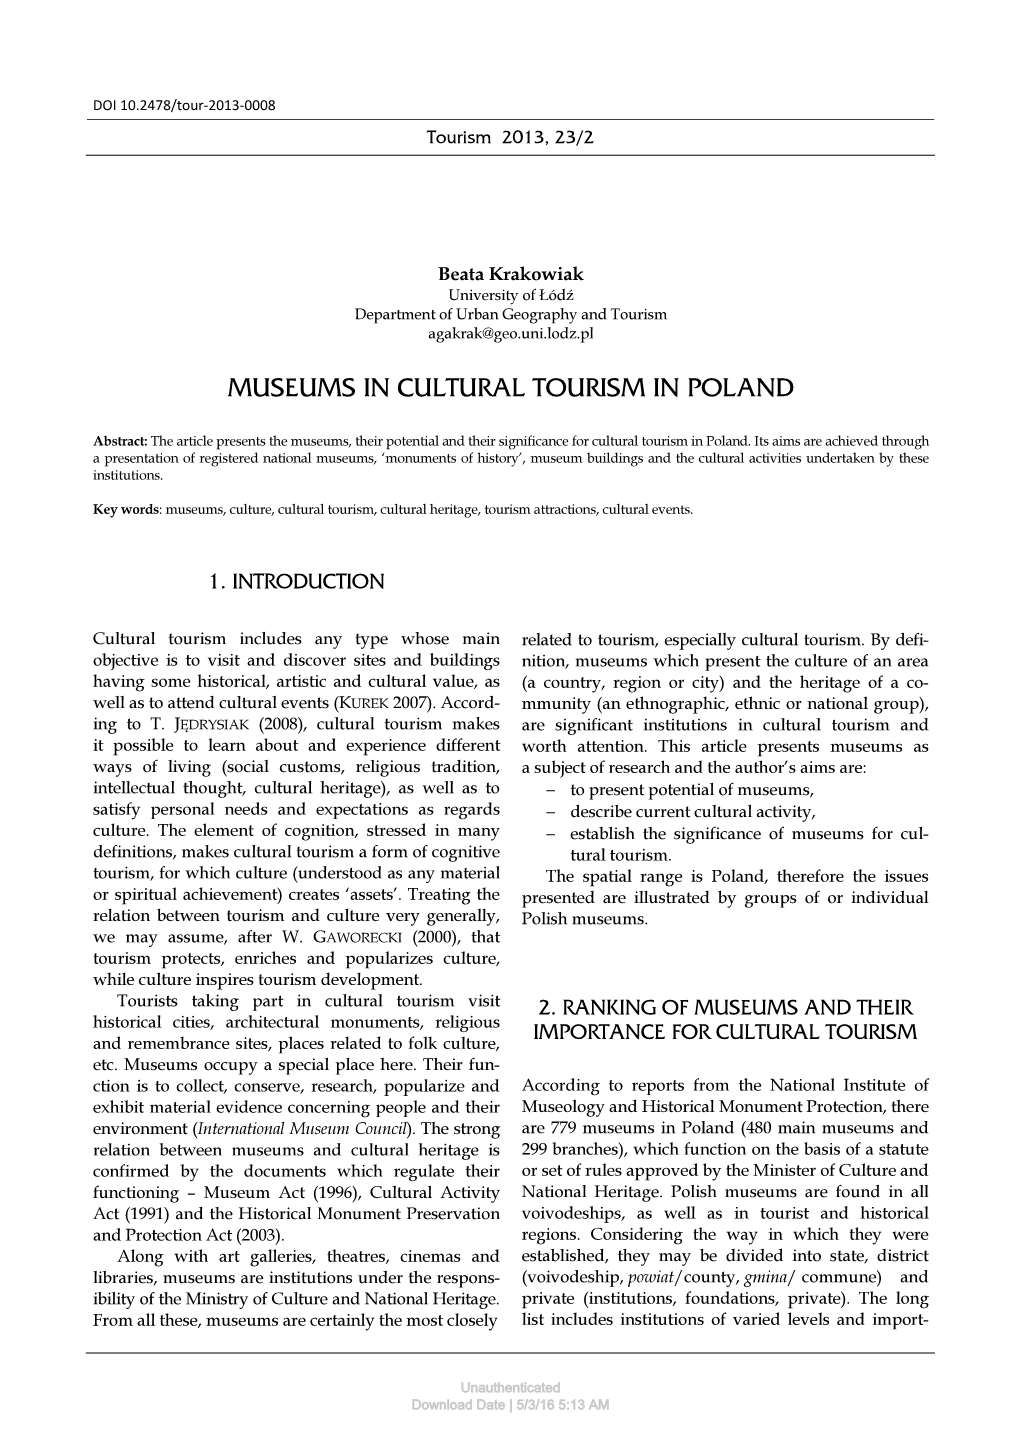 Museums in Cultural Tourism in Poland